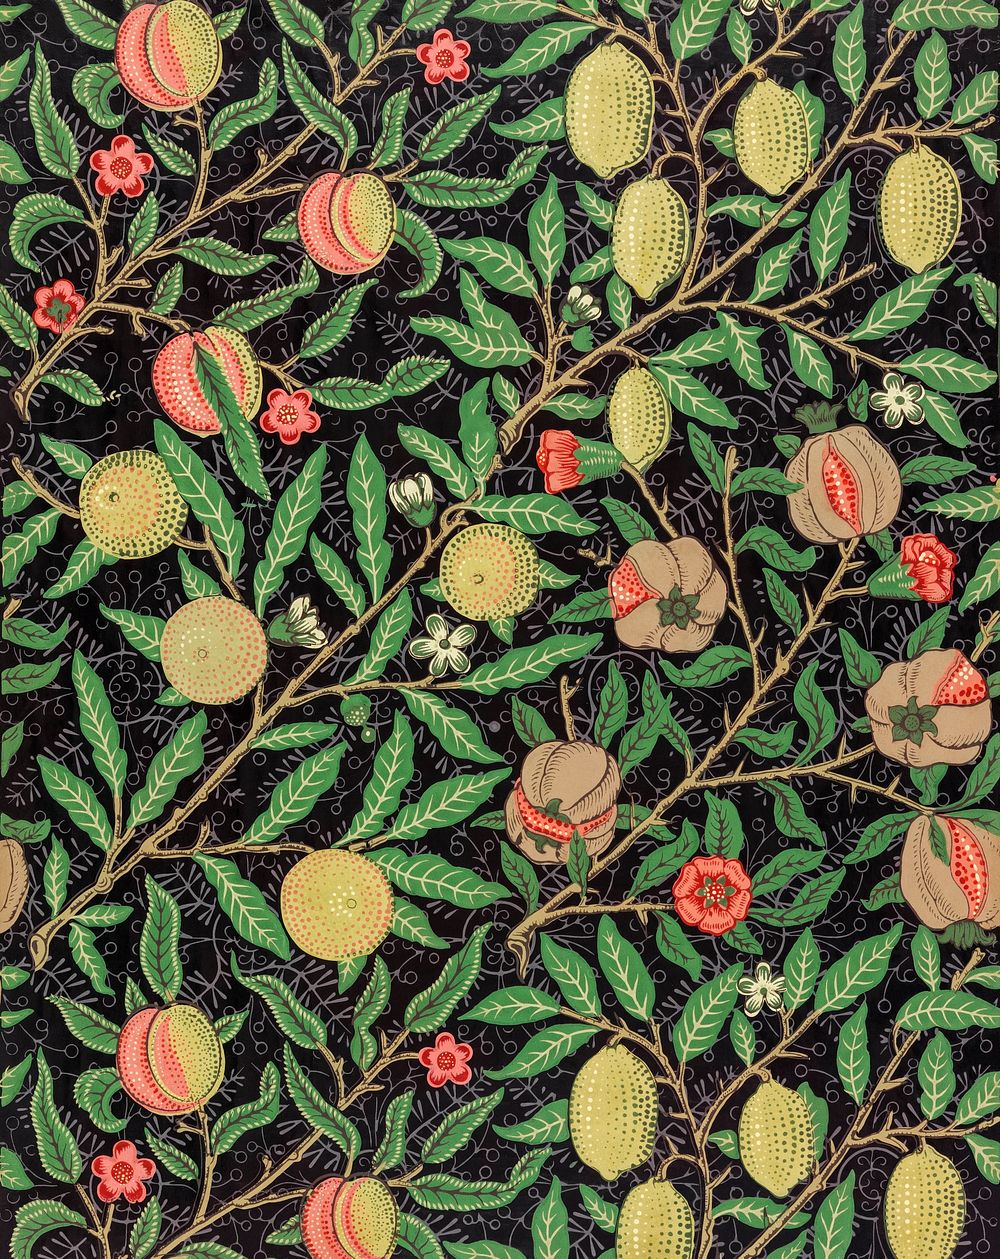 William Morris's Fruit pattern (1862) wallpaper. Famous pattern, original from The Smithsonian Institution. Digitally…